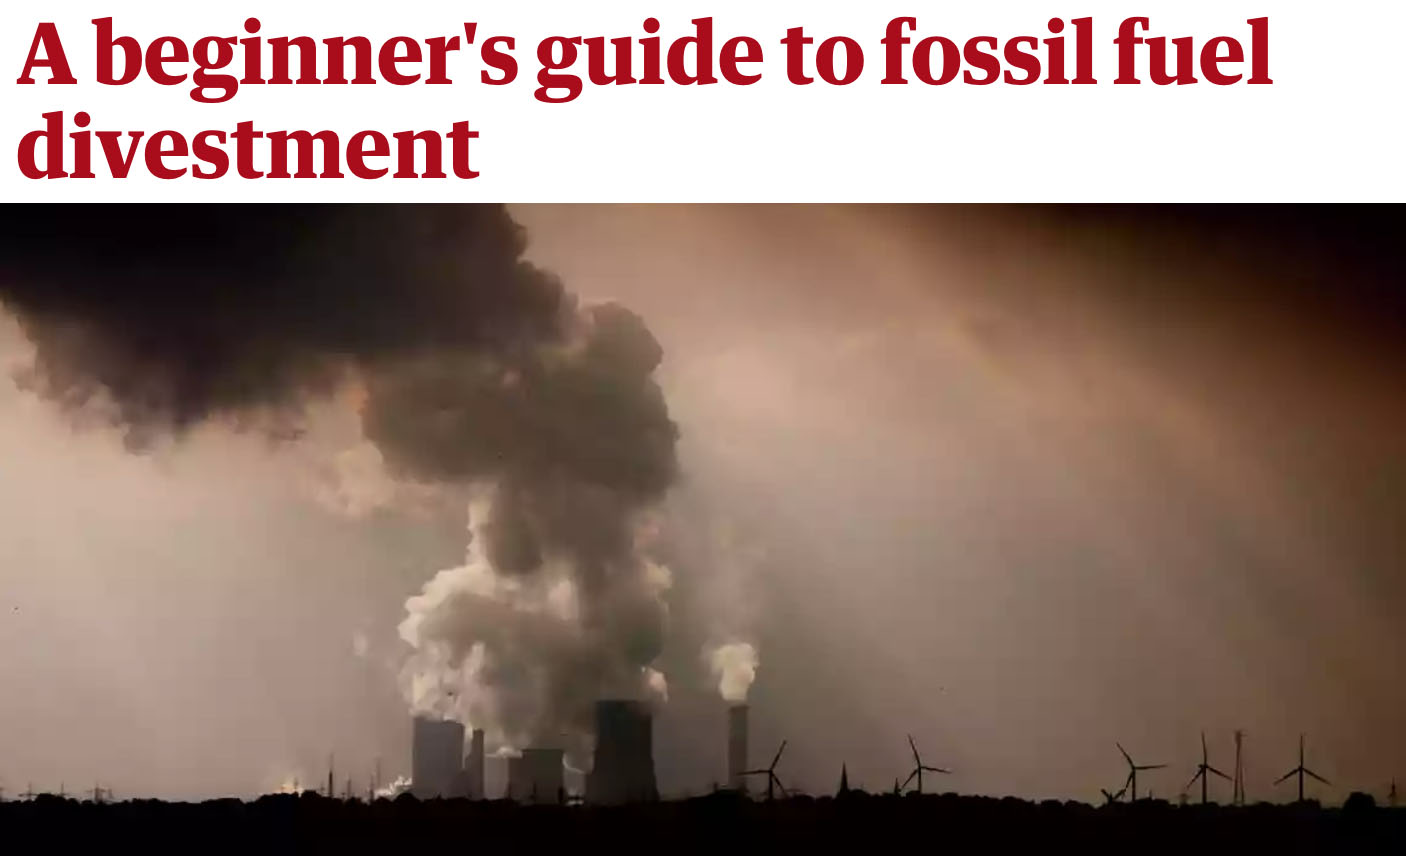 A Beginner's Guide To Fossil Fuel Divestment